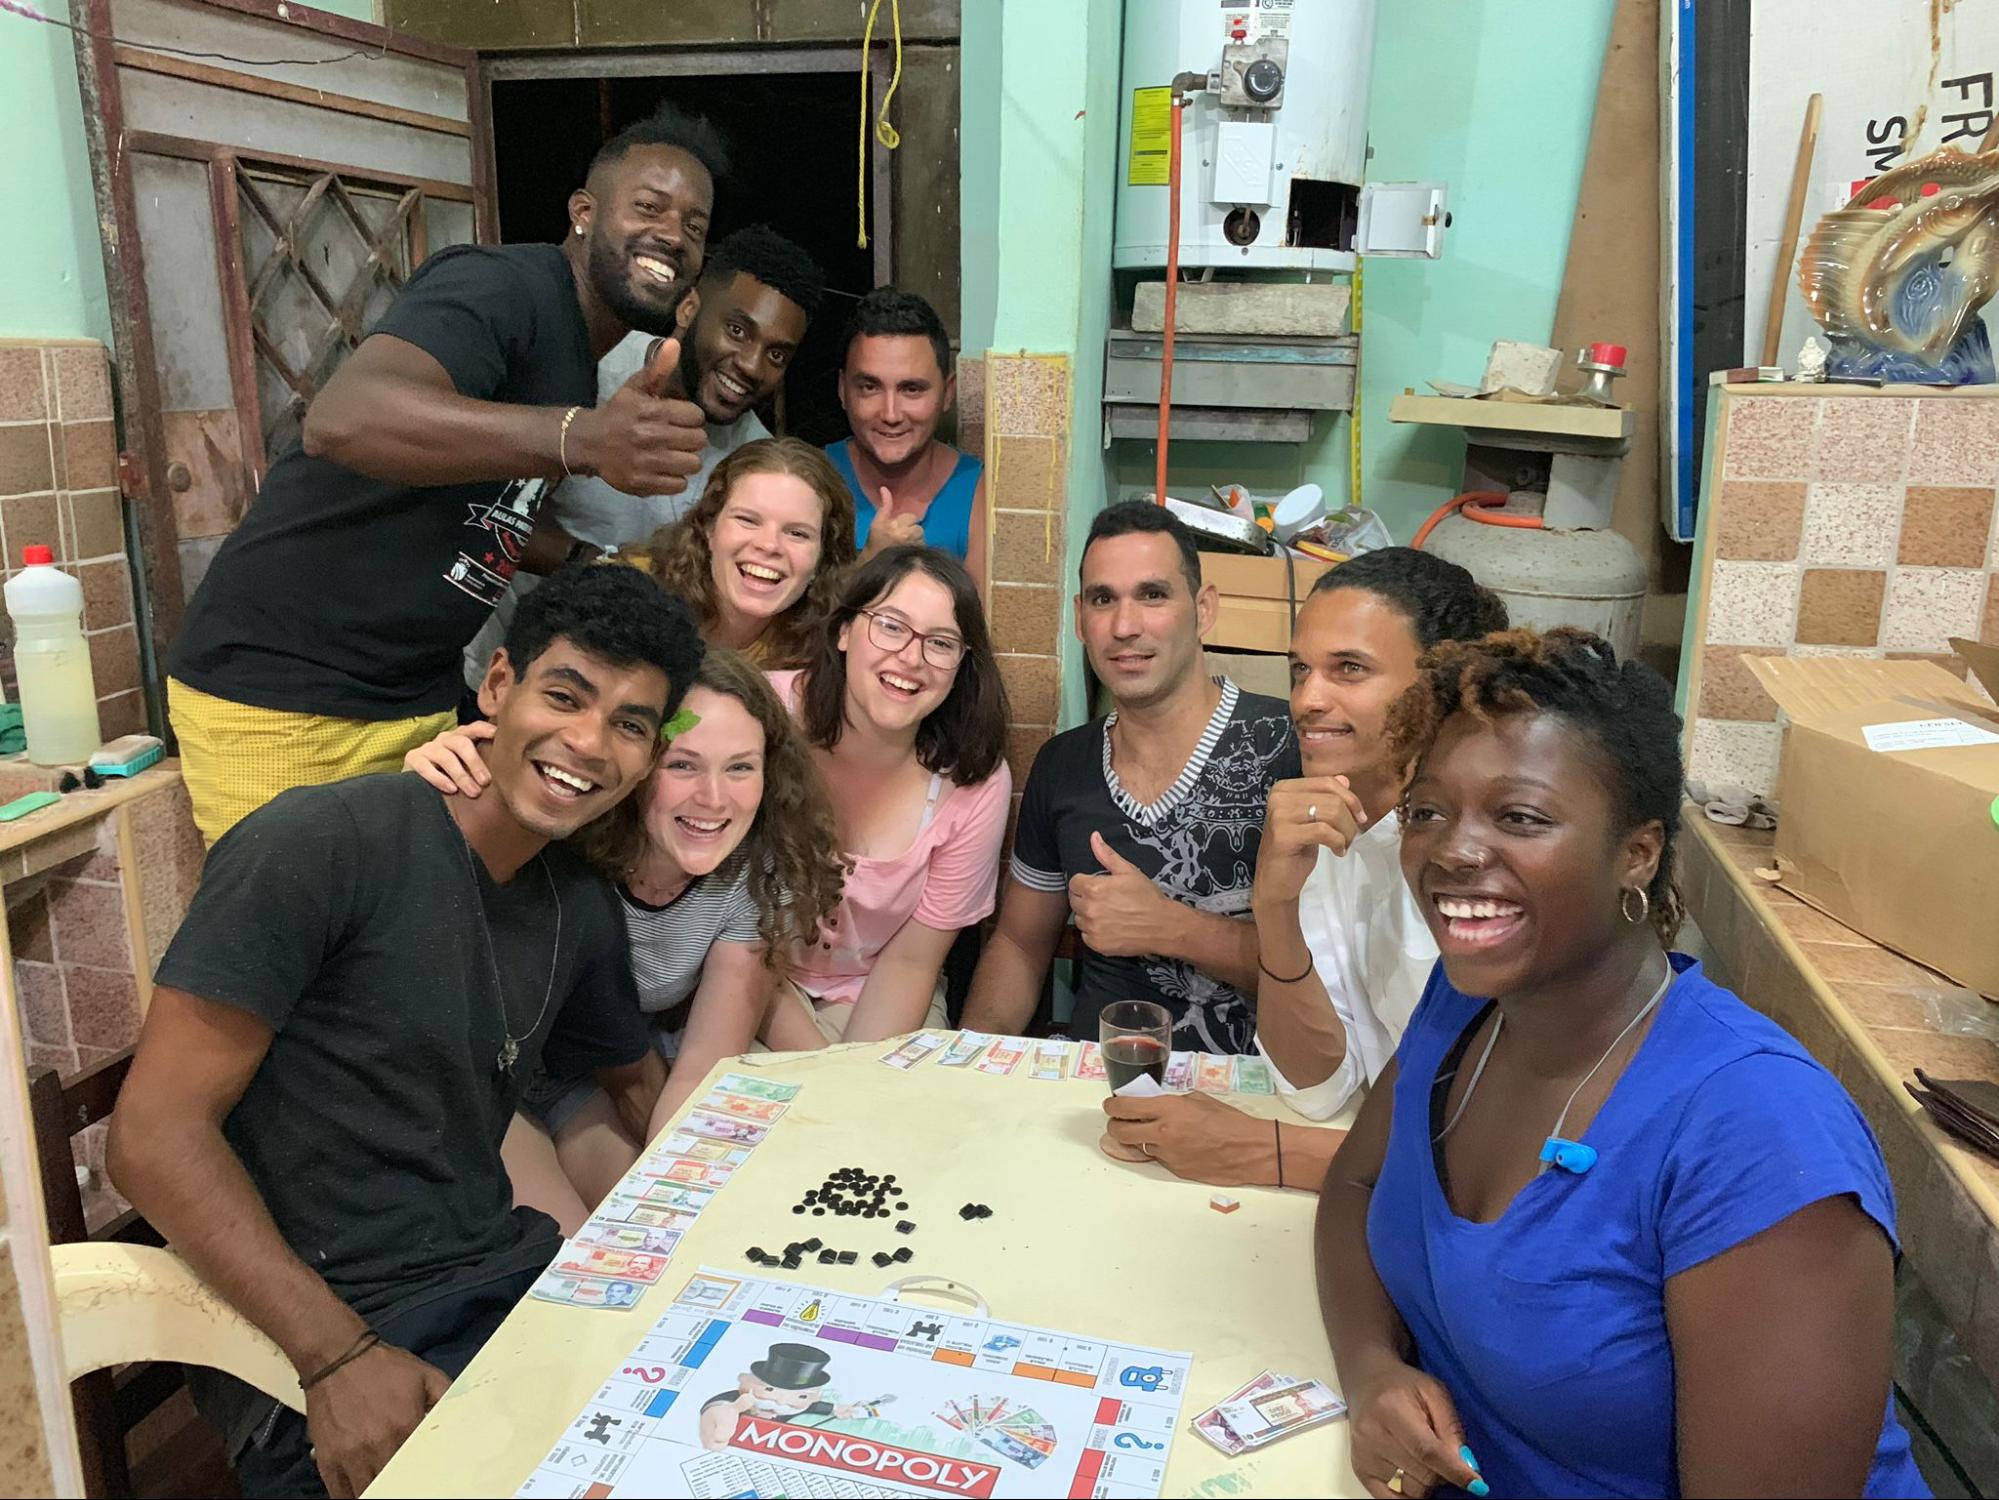 SSA Alumni are having a game night with locals in Havana.